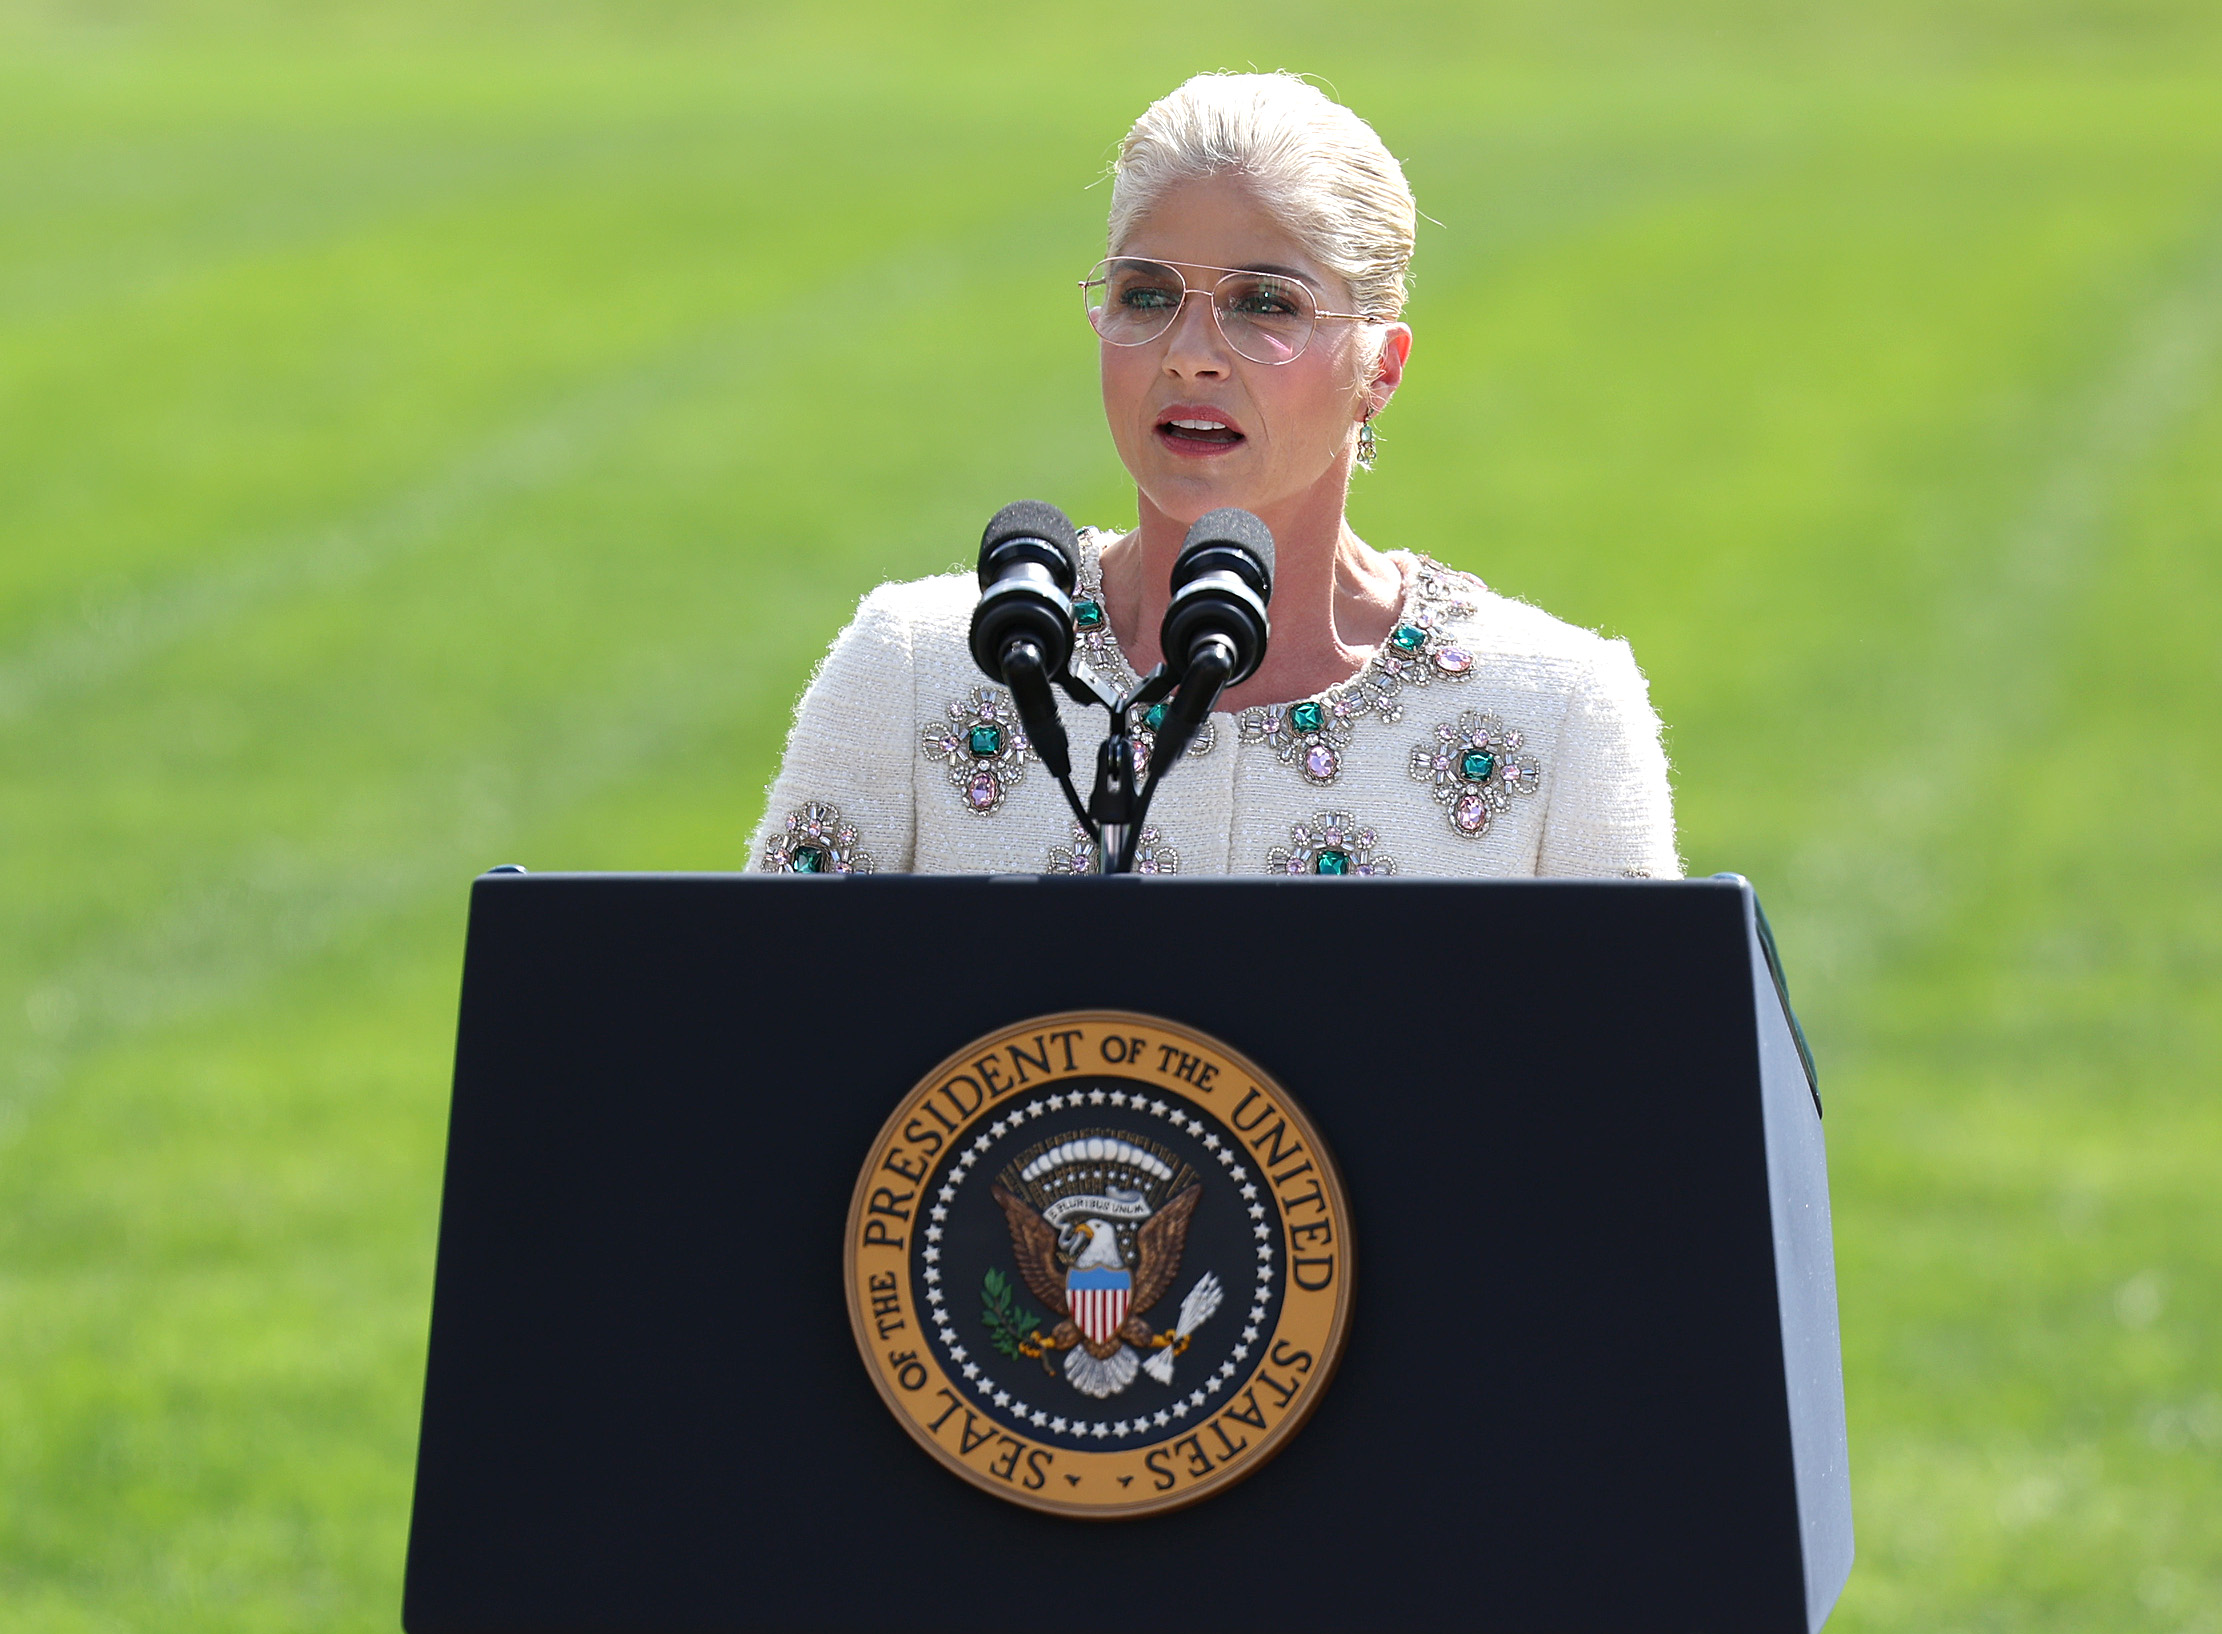 Selma Blair, renowned Actress and Disability Rights Advocate, had the distinct privilege of introducing U.S. President Joe Biden at an event commemorating the Americans with Disabilities Act (ADA) and Rehabilitation Act (Rehab Act) held at the White House on October 02, 2023 | Source: Getty Images